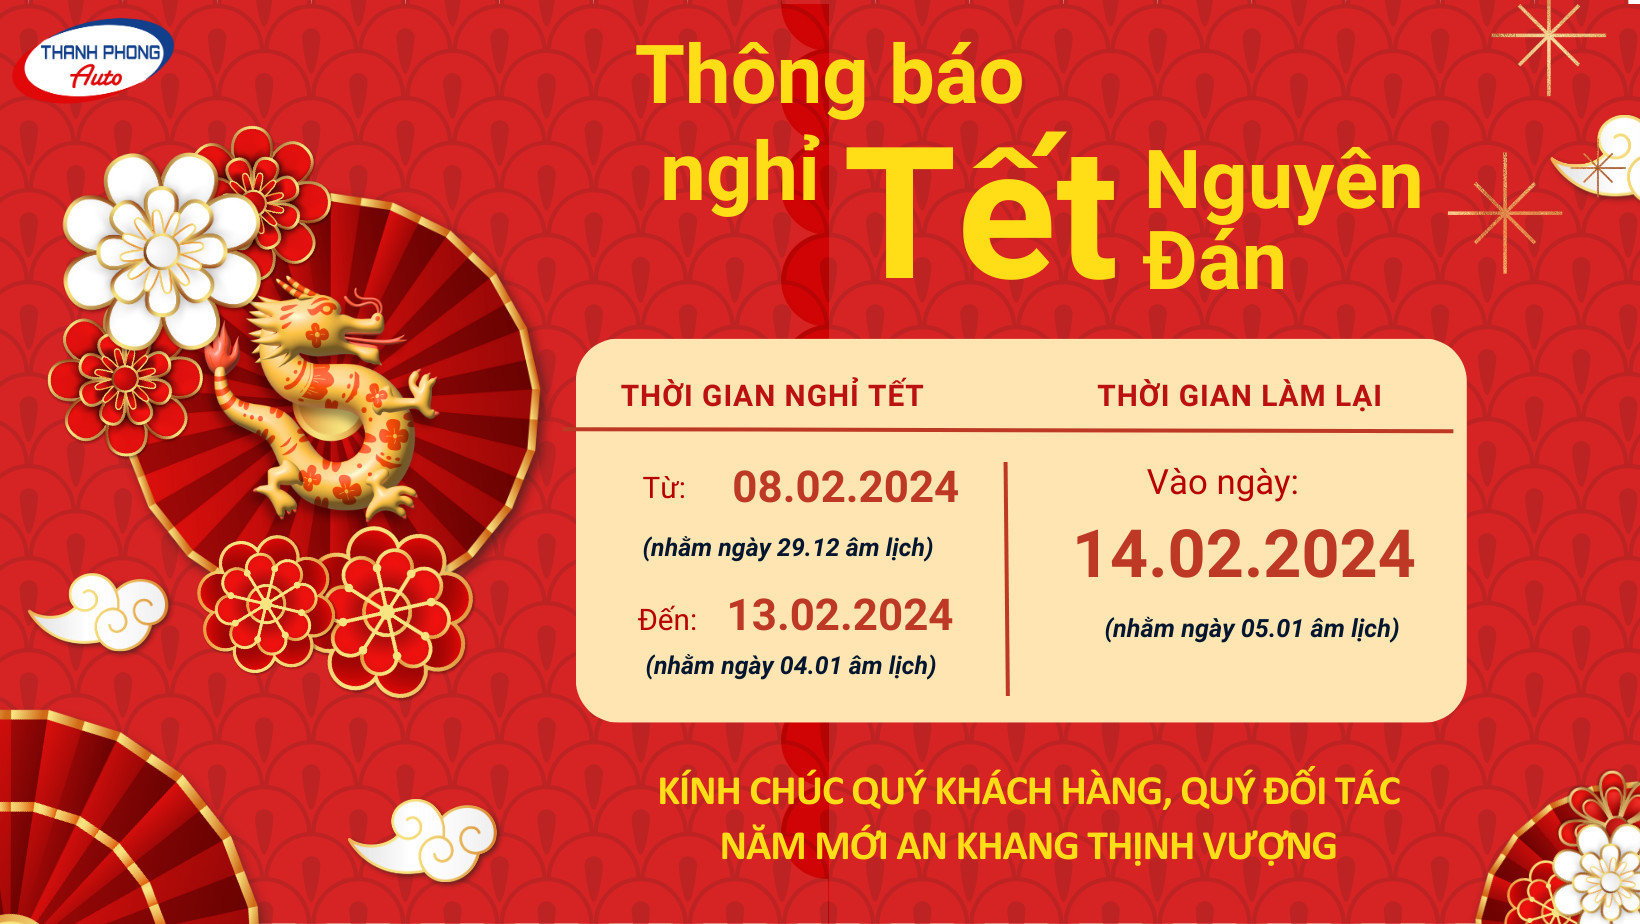 Notice of Lunar New Year 2024 Reputable Garage Thanh Phong Auto Hcm 2024